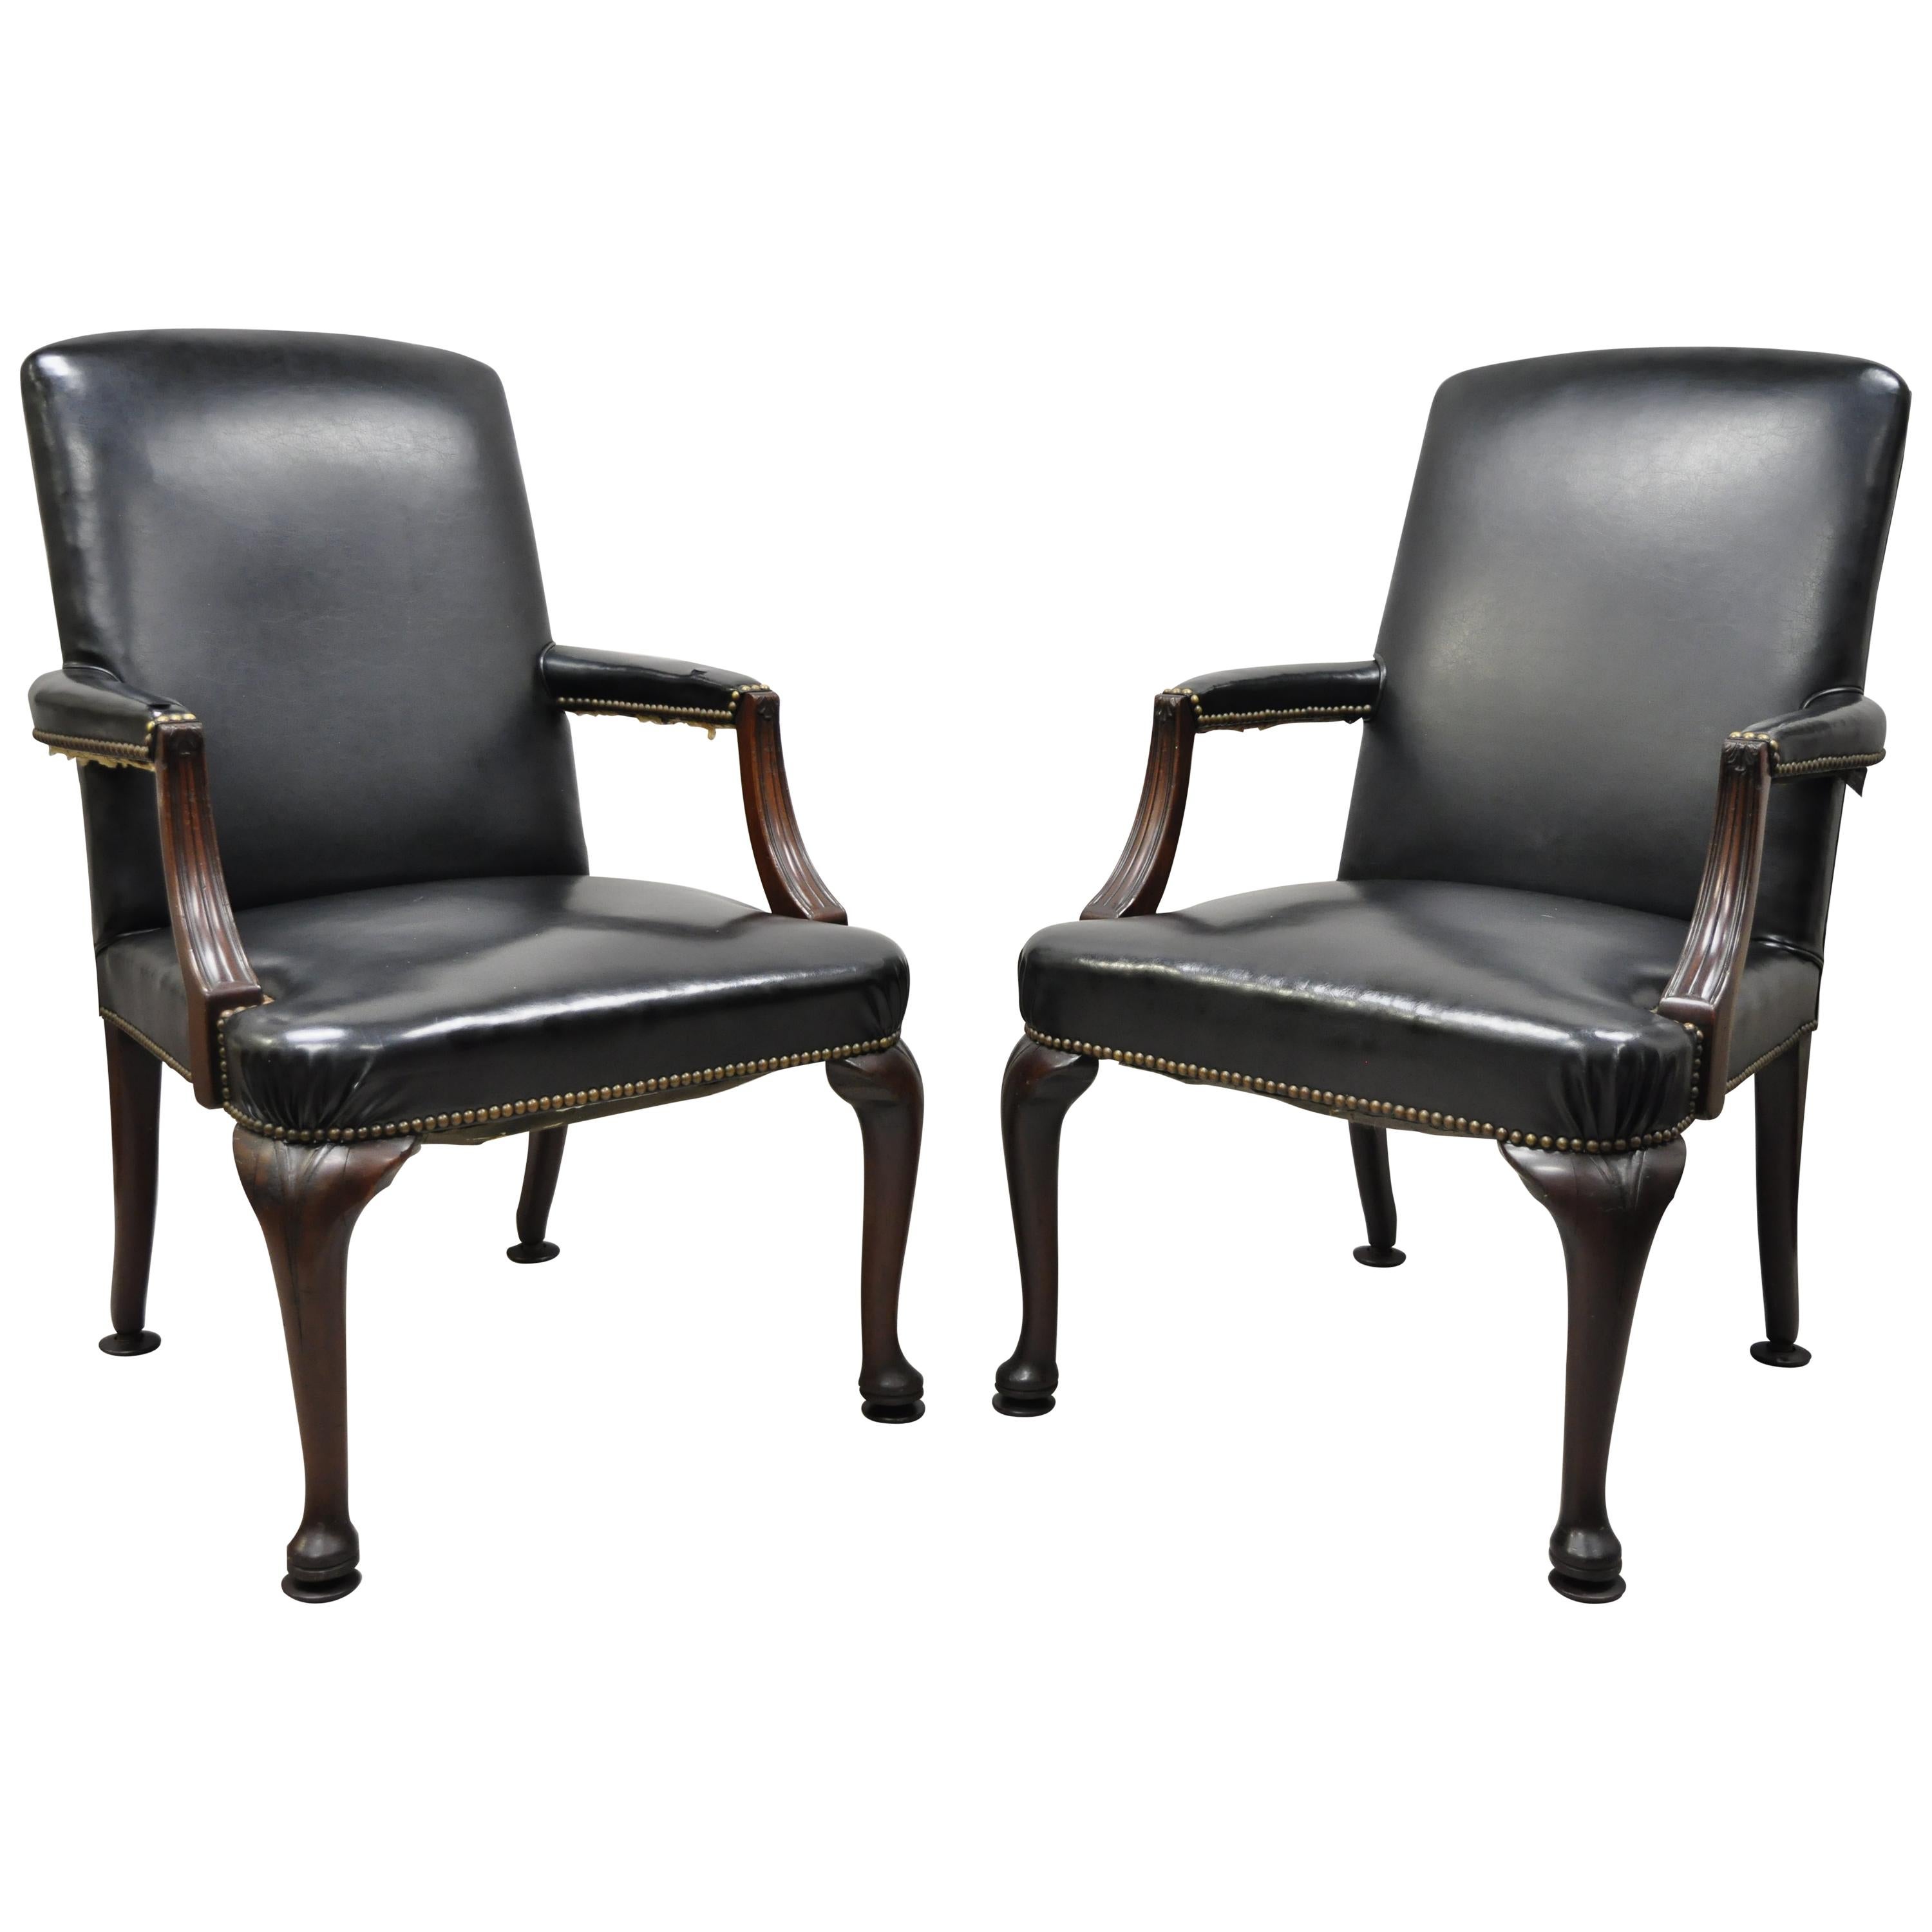 Antique English Georgian Style Dark Green Leather Library Office Chairs, a Pair